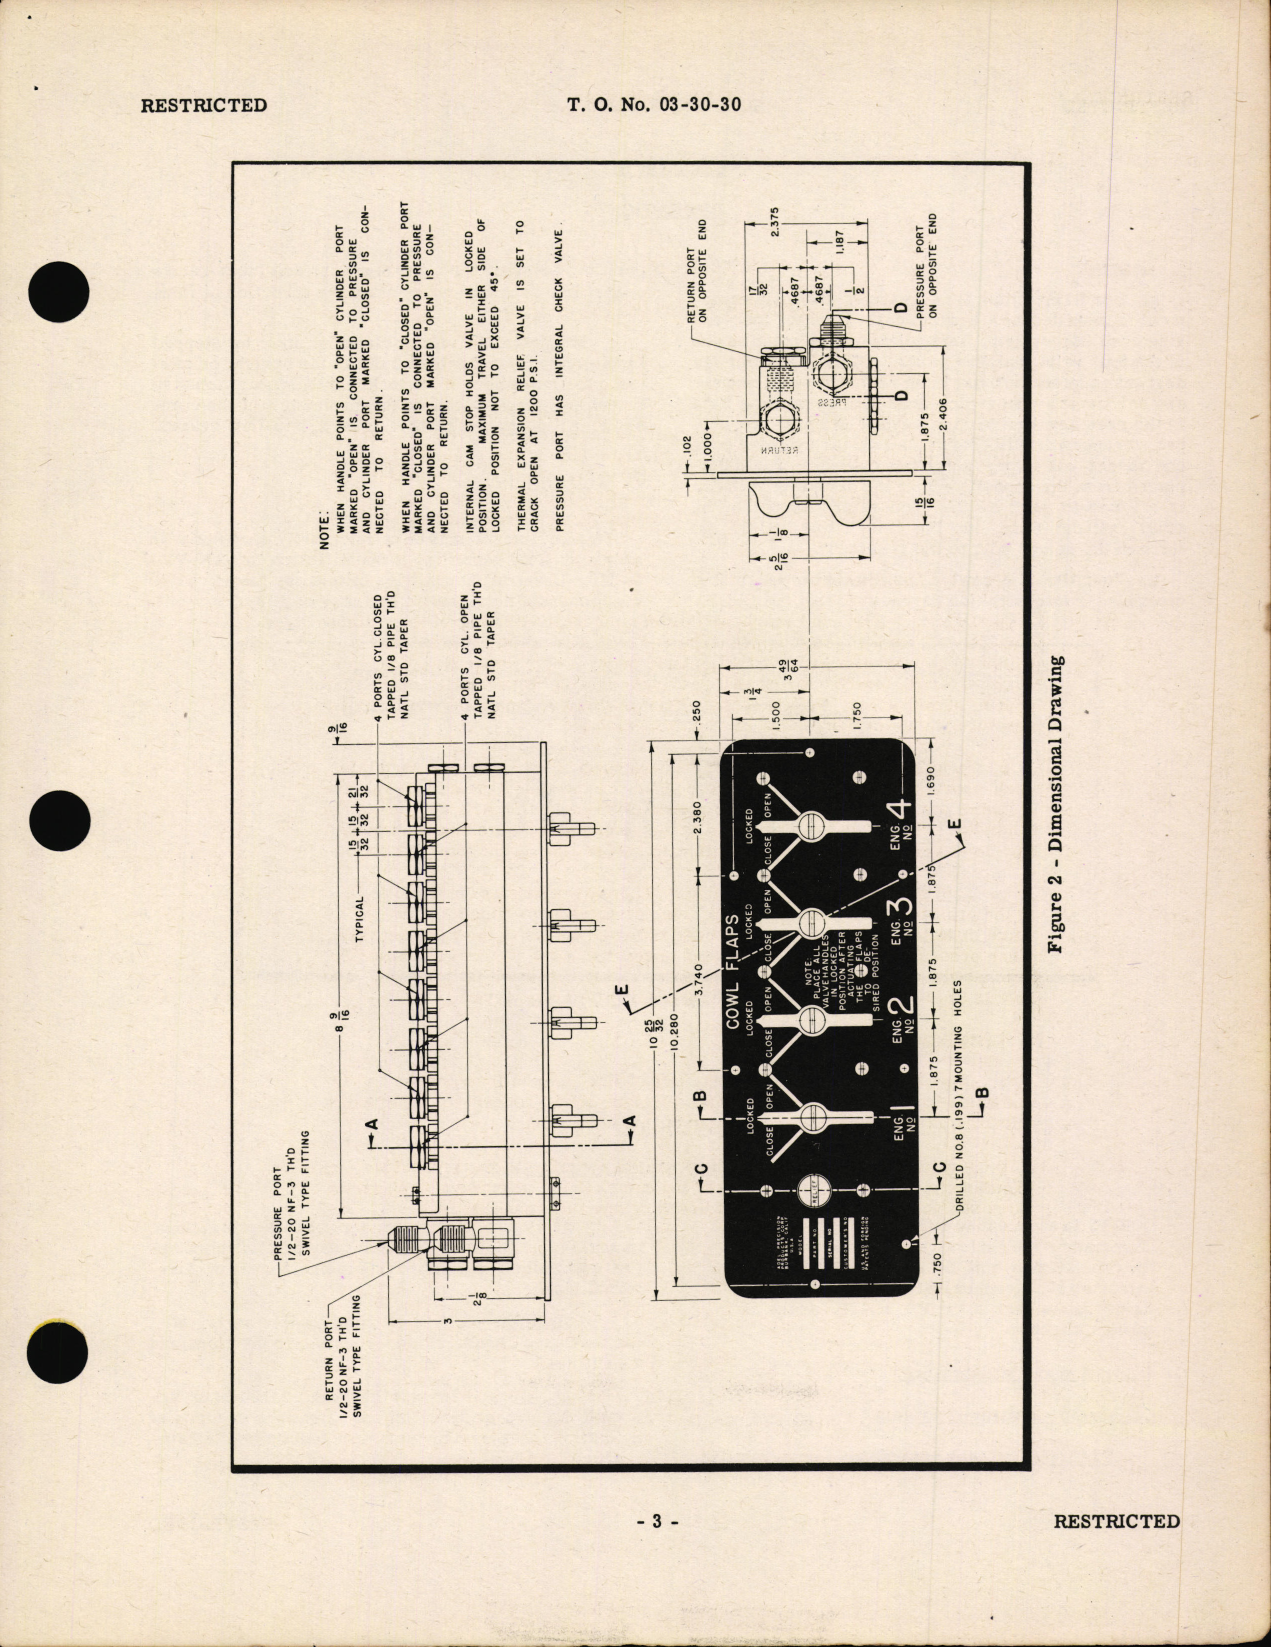 Sample page 7 from AirCorps Library document: Handbook of Instructions with Parts Catalog for G9744 Quadruple Unit Cowl Flap Selector Valve